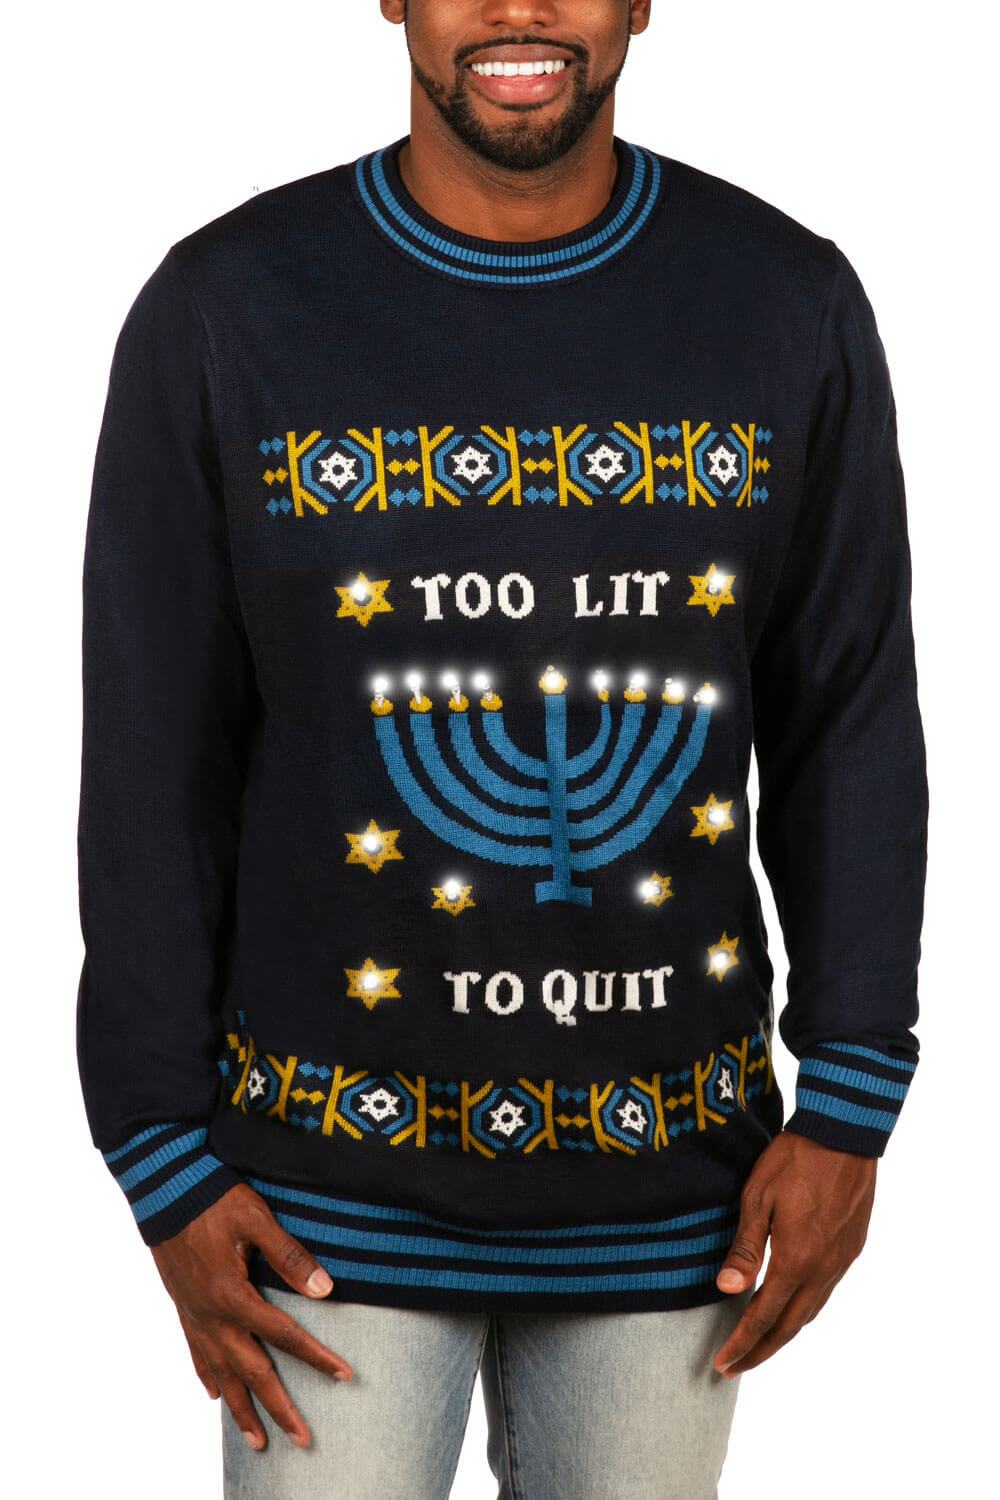 Tipsy Elves Sweaters Men's Too Lit To Quit Sweater - by Tipsy Elves